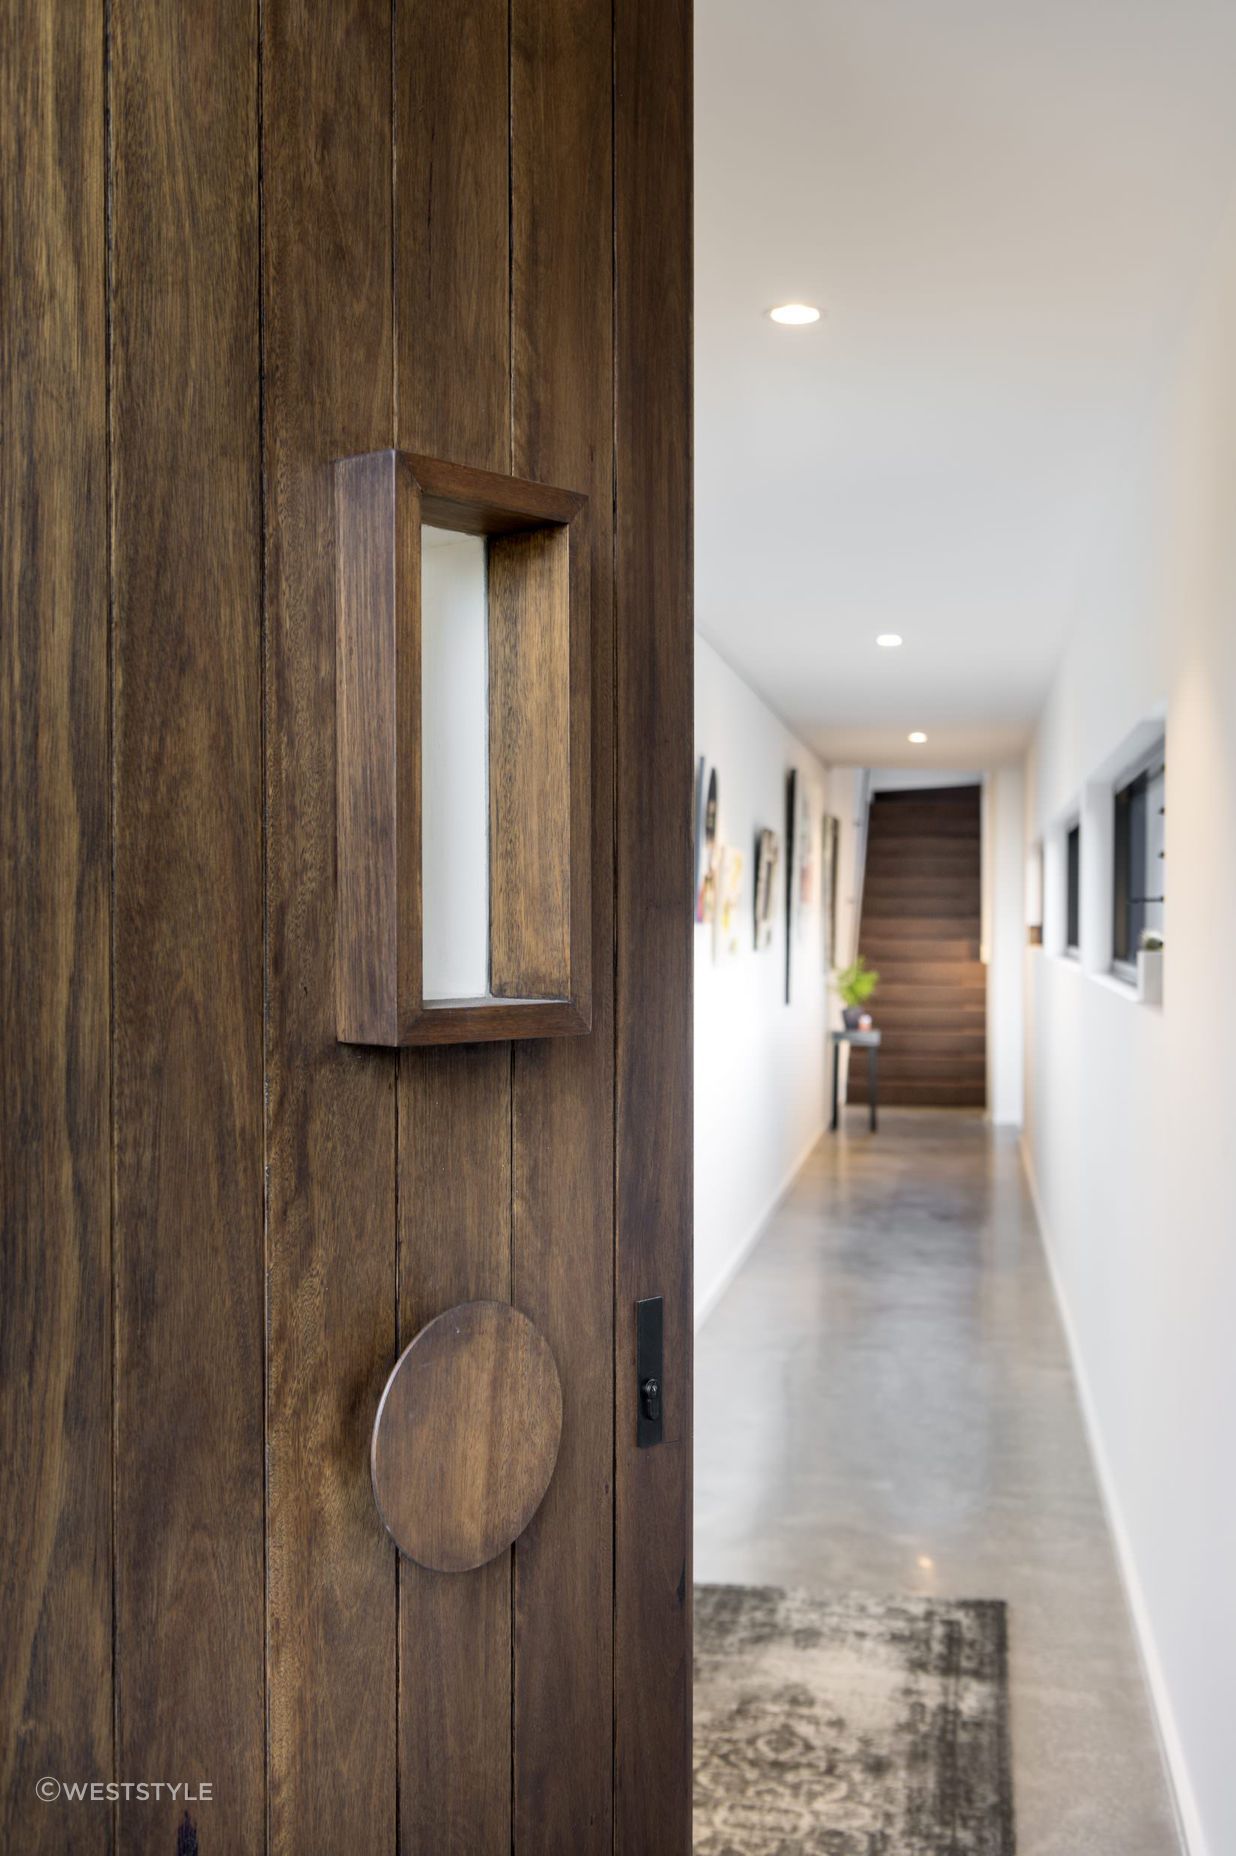 The door's rich wood grain and unique circular handle set the tone for the home's interior. Featured project: Alma by Weststyle